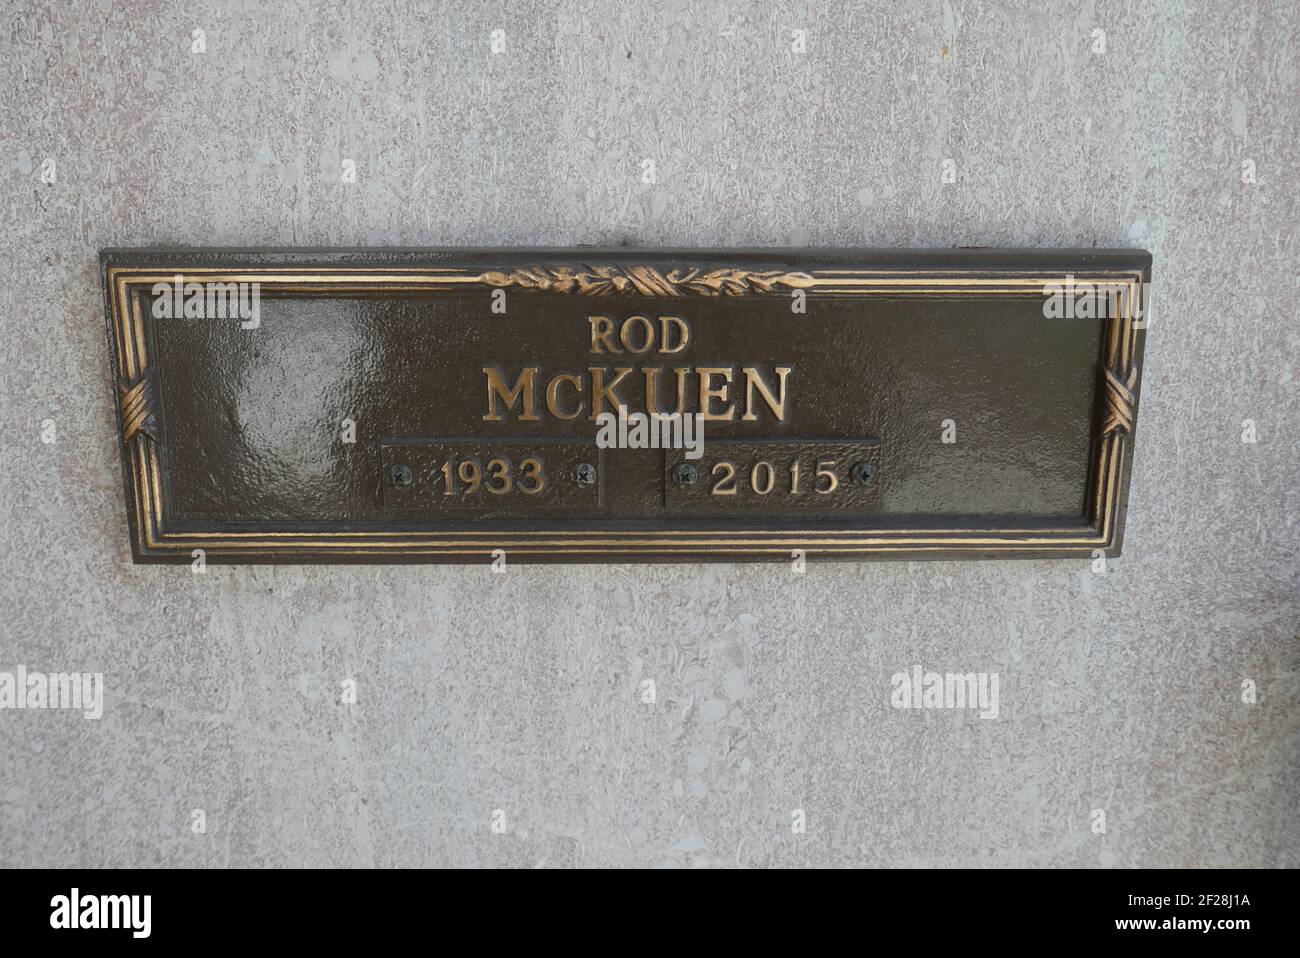 Los Angeles, California, USA 9th March 2021 A general view of atmosphere of poet/actor Rod McKuen's grave at Pierce Brothers Westwood Village Memorial Park on March 9, 2021 in Los Angeles, California, USA. Photo by Barry King/Alamy Stock Photo Stock Photo